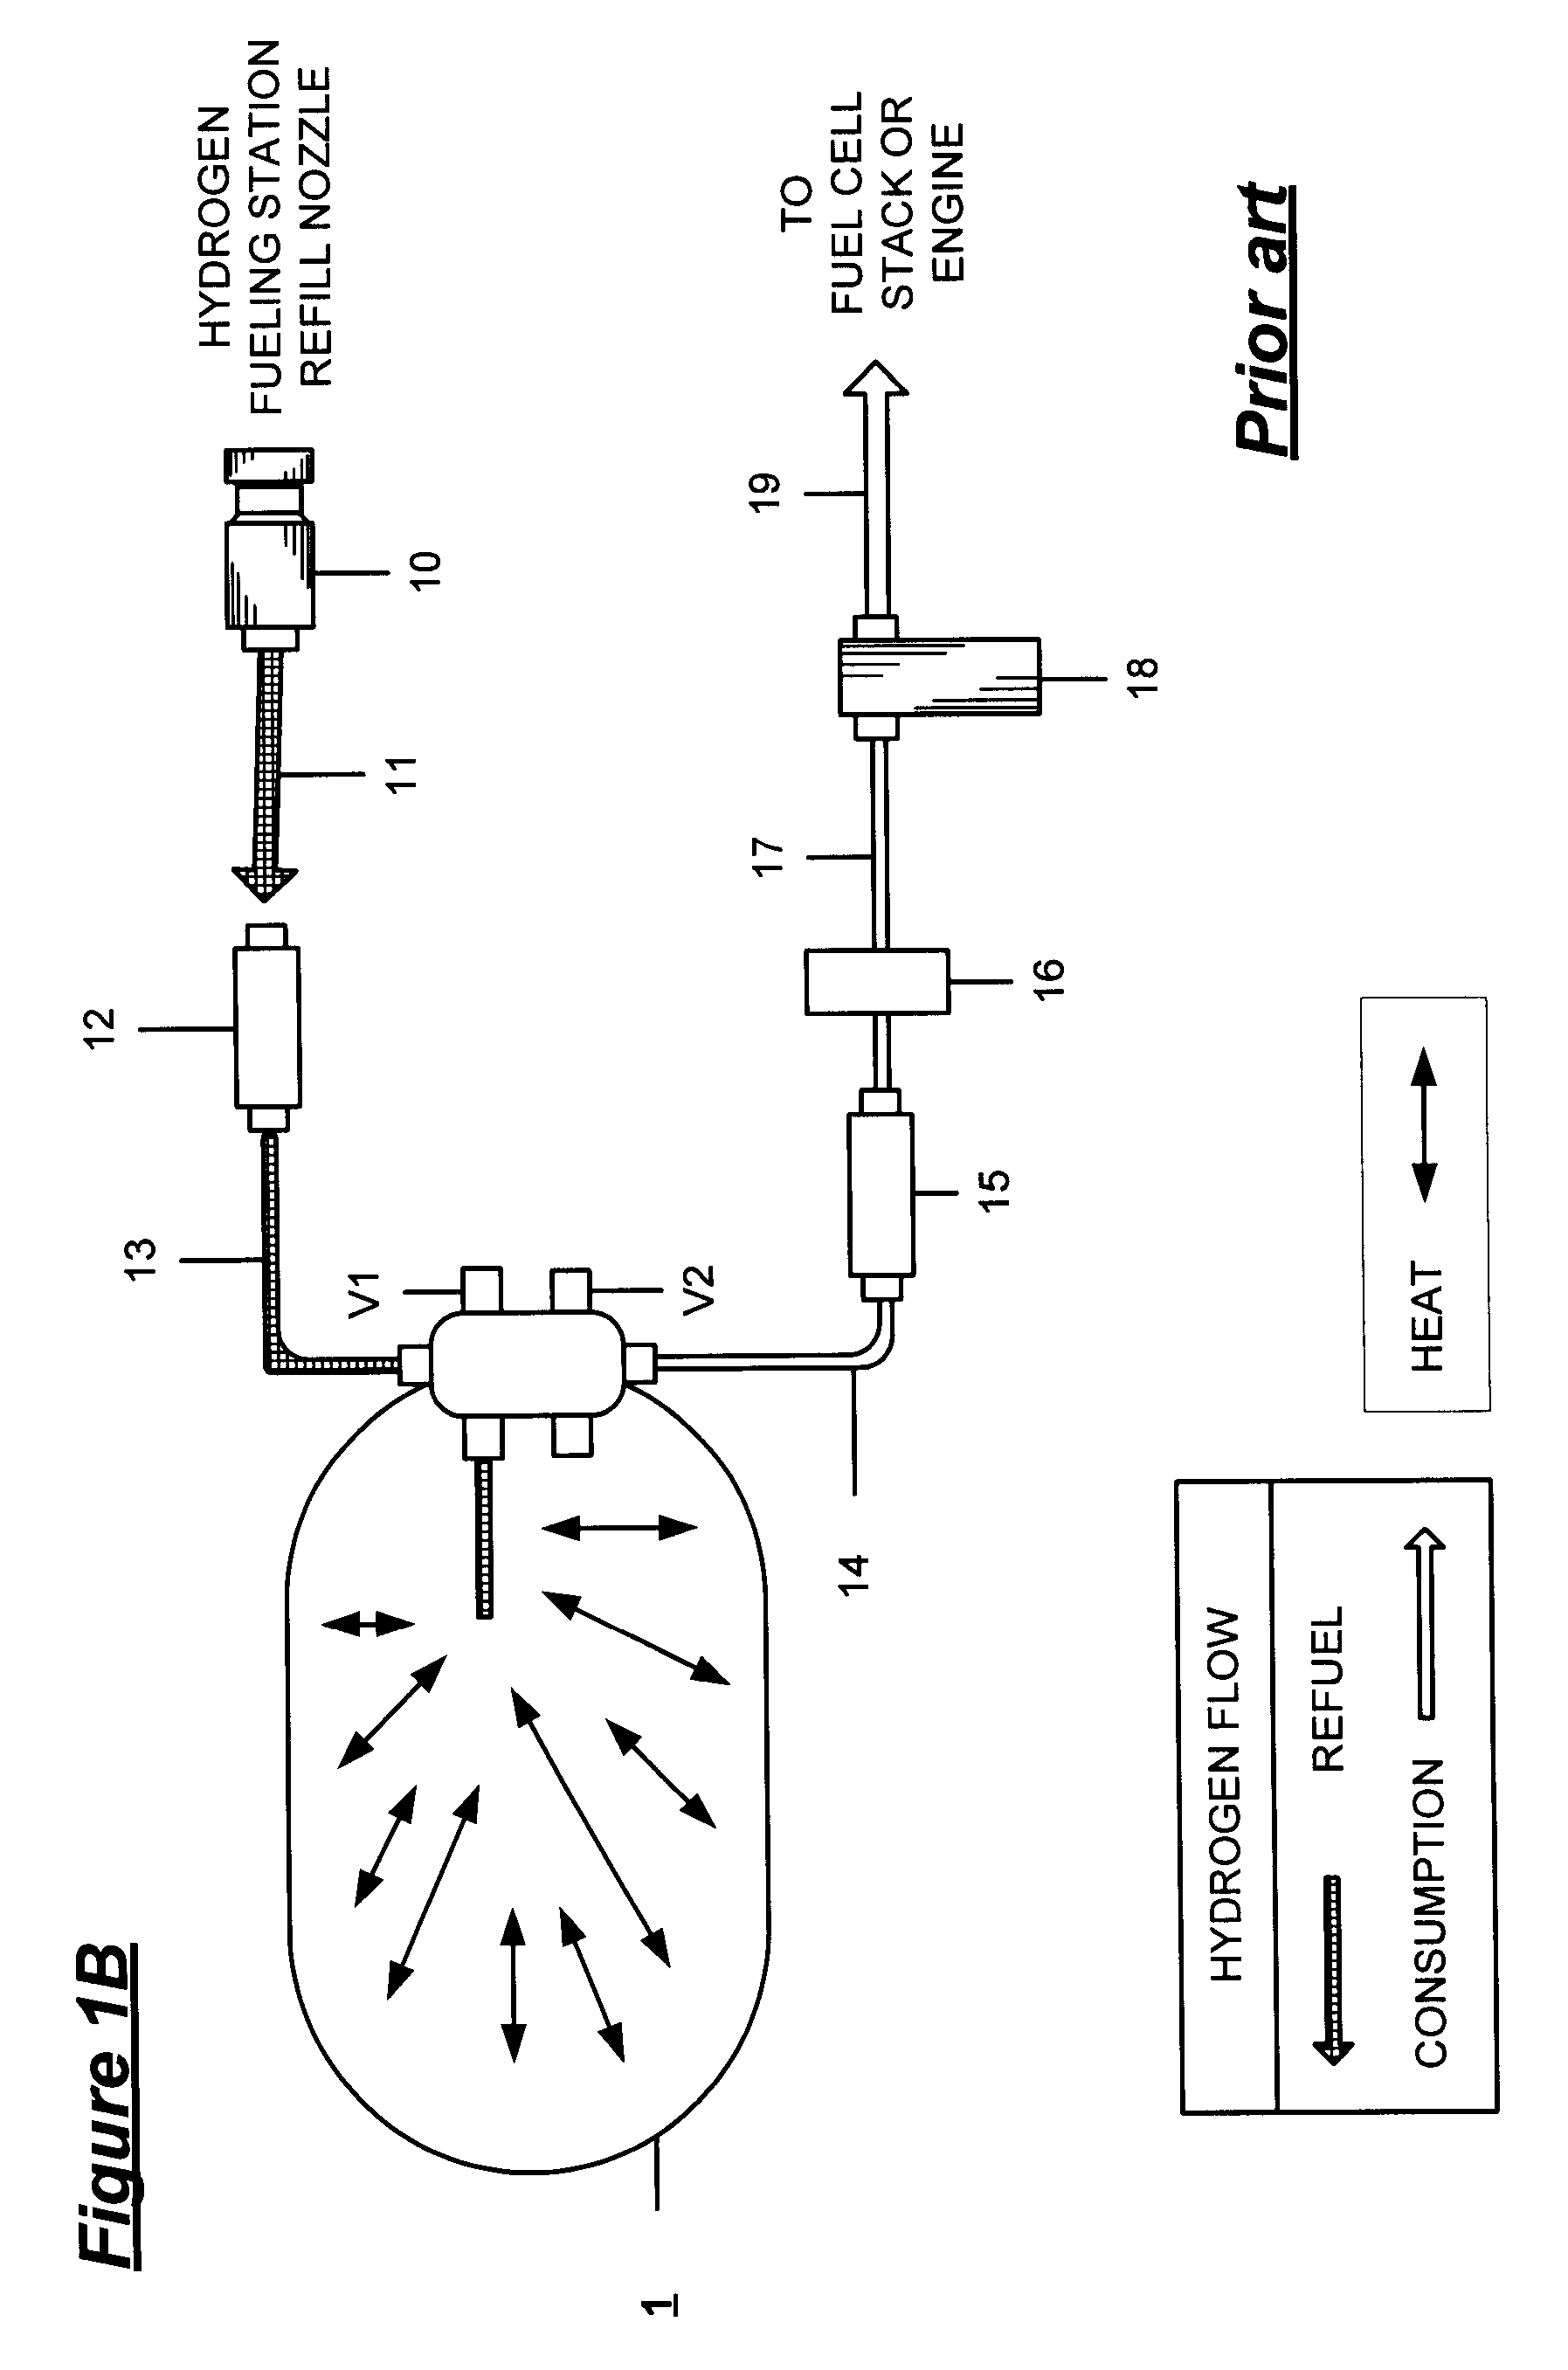 Pressure powered cooling system for enhancing the refill speed and capacity of on board high pressure vehicle gas storage tanks